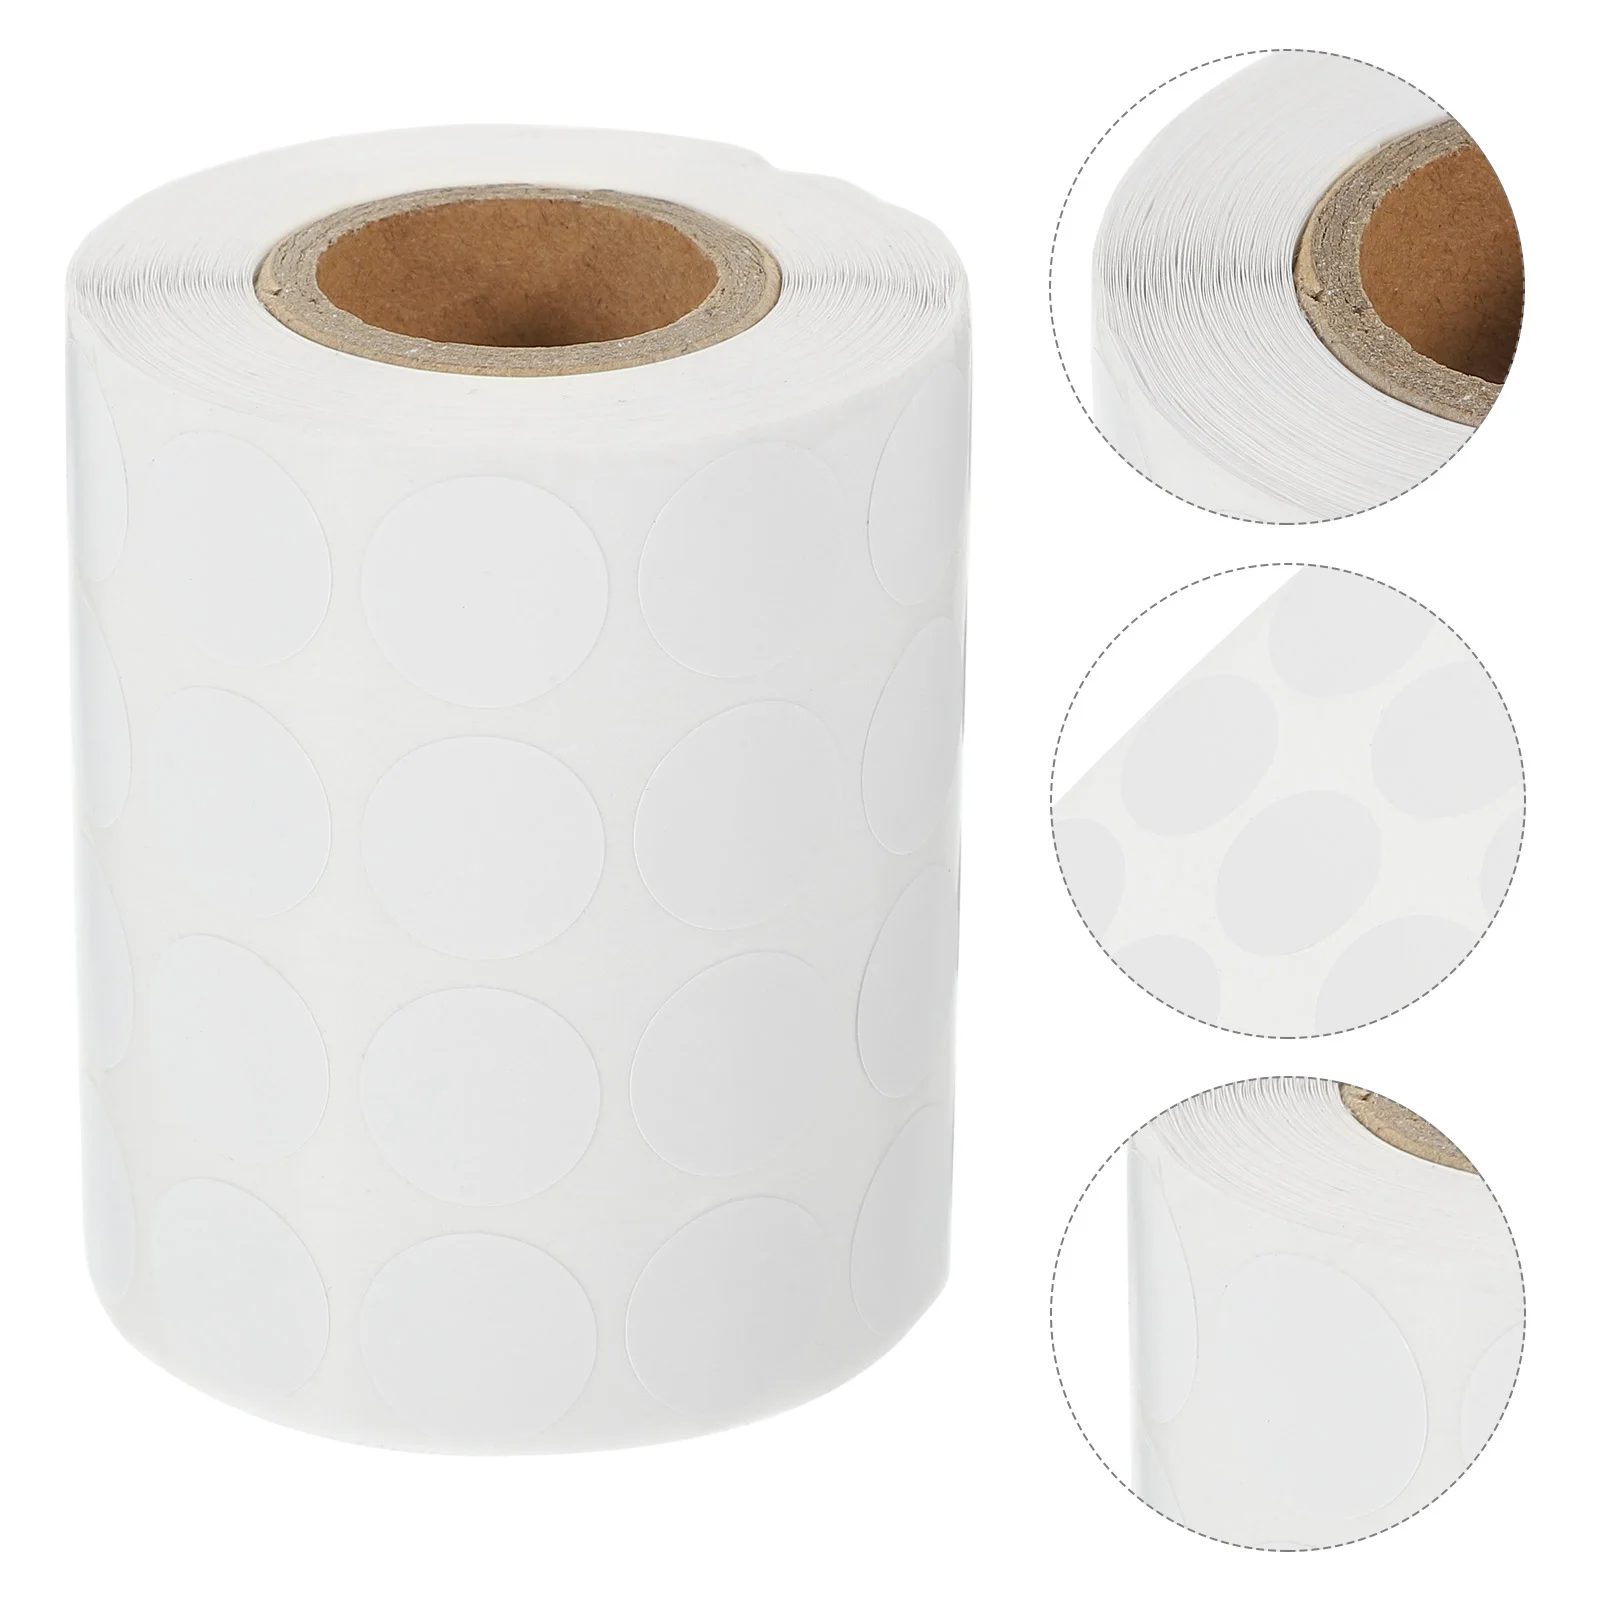 

3000 Pcs Blank Round Labels Stickers Dot Classification Coded Paper Circle Small Adhesive Dots